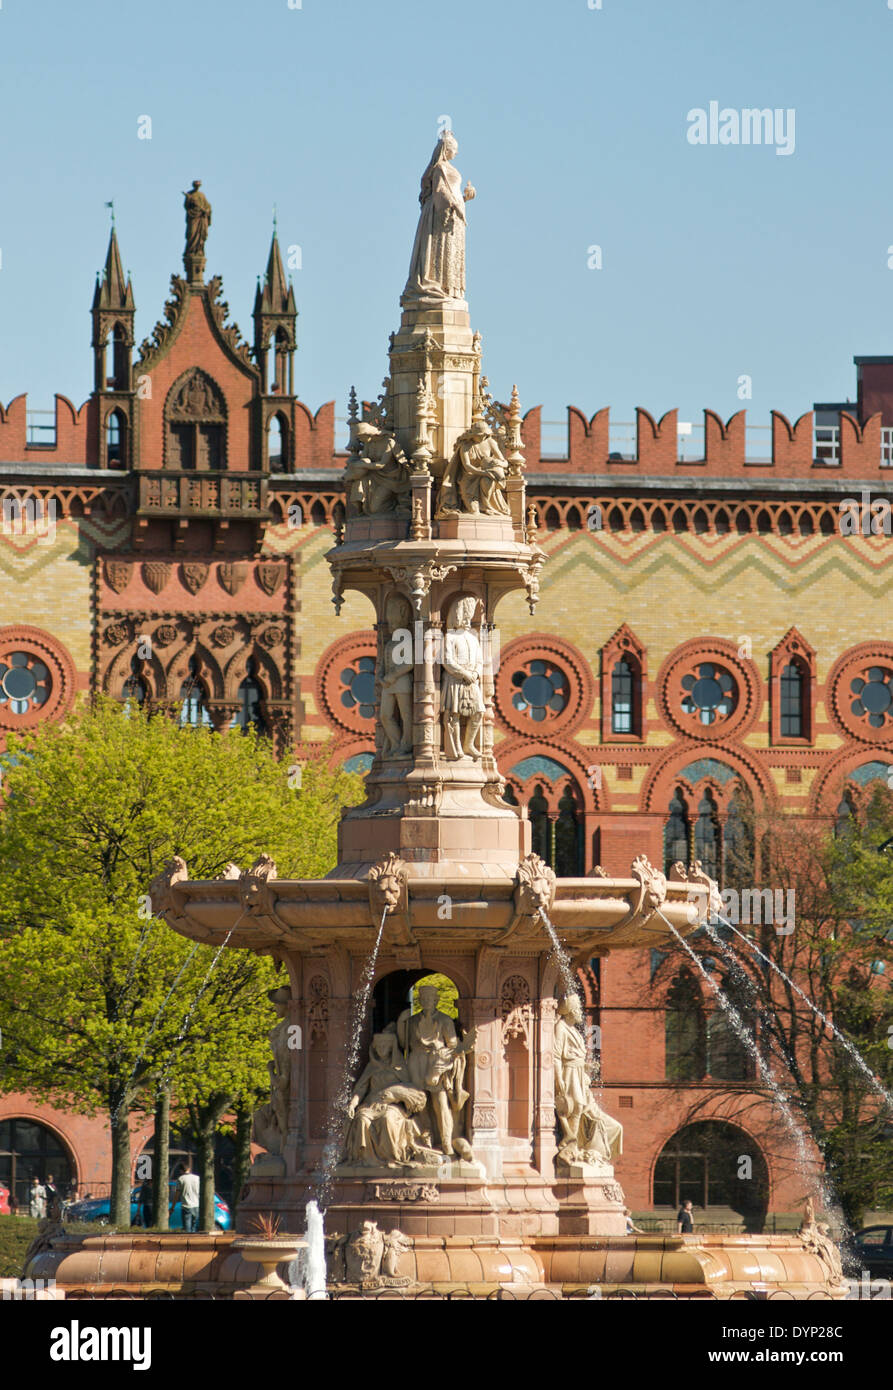 The Doulton Fountain at Glasgow Green in Glasgow, with the Templeton Carpet Factory in the background. Stock Photo